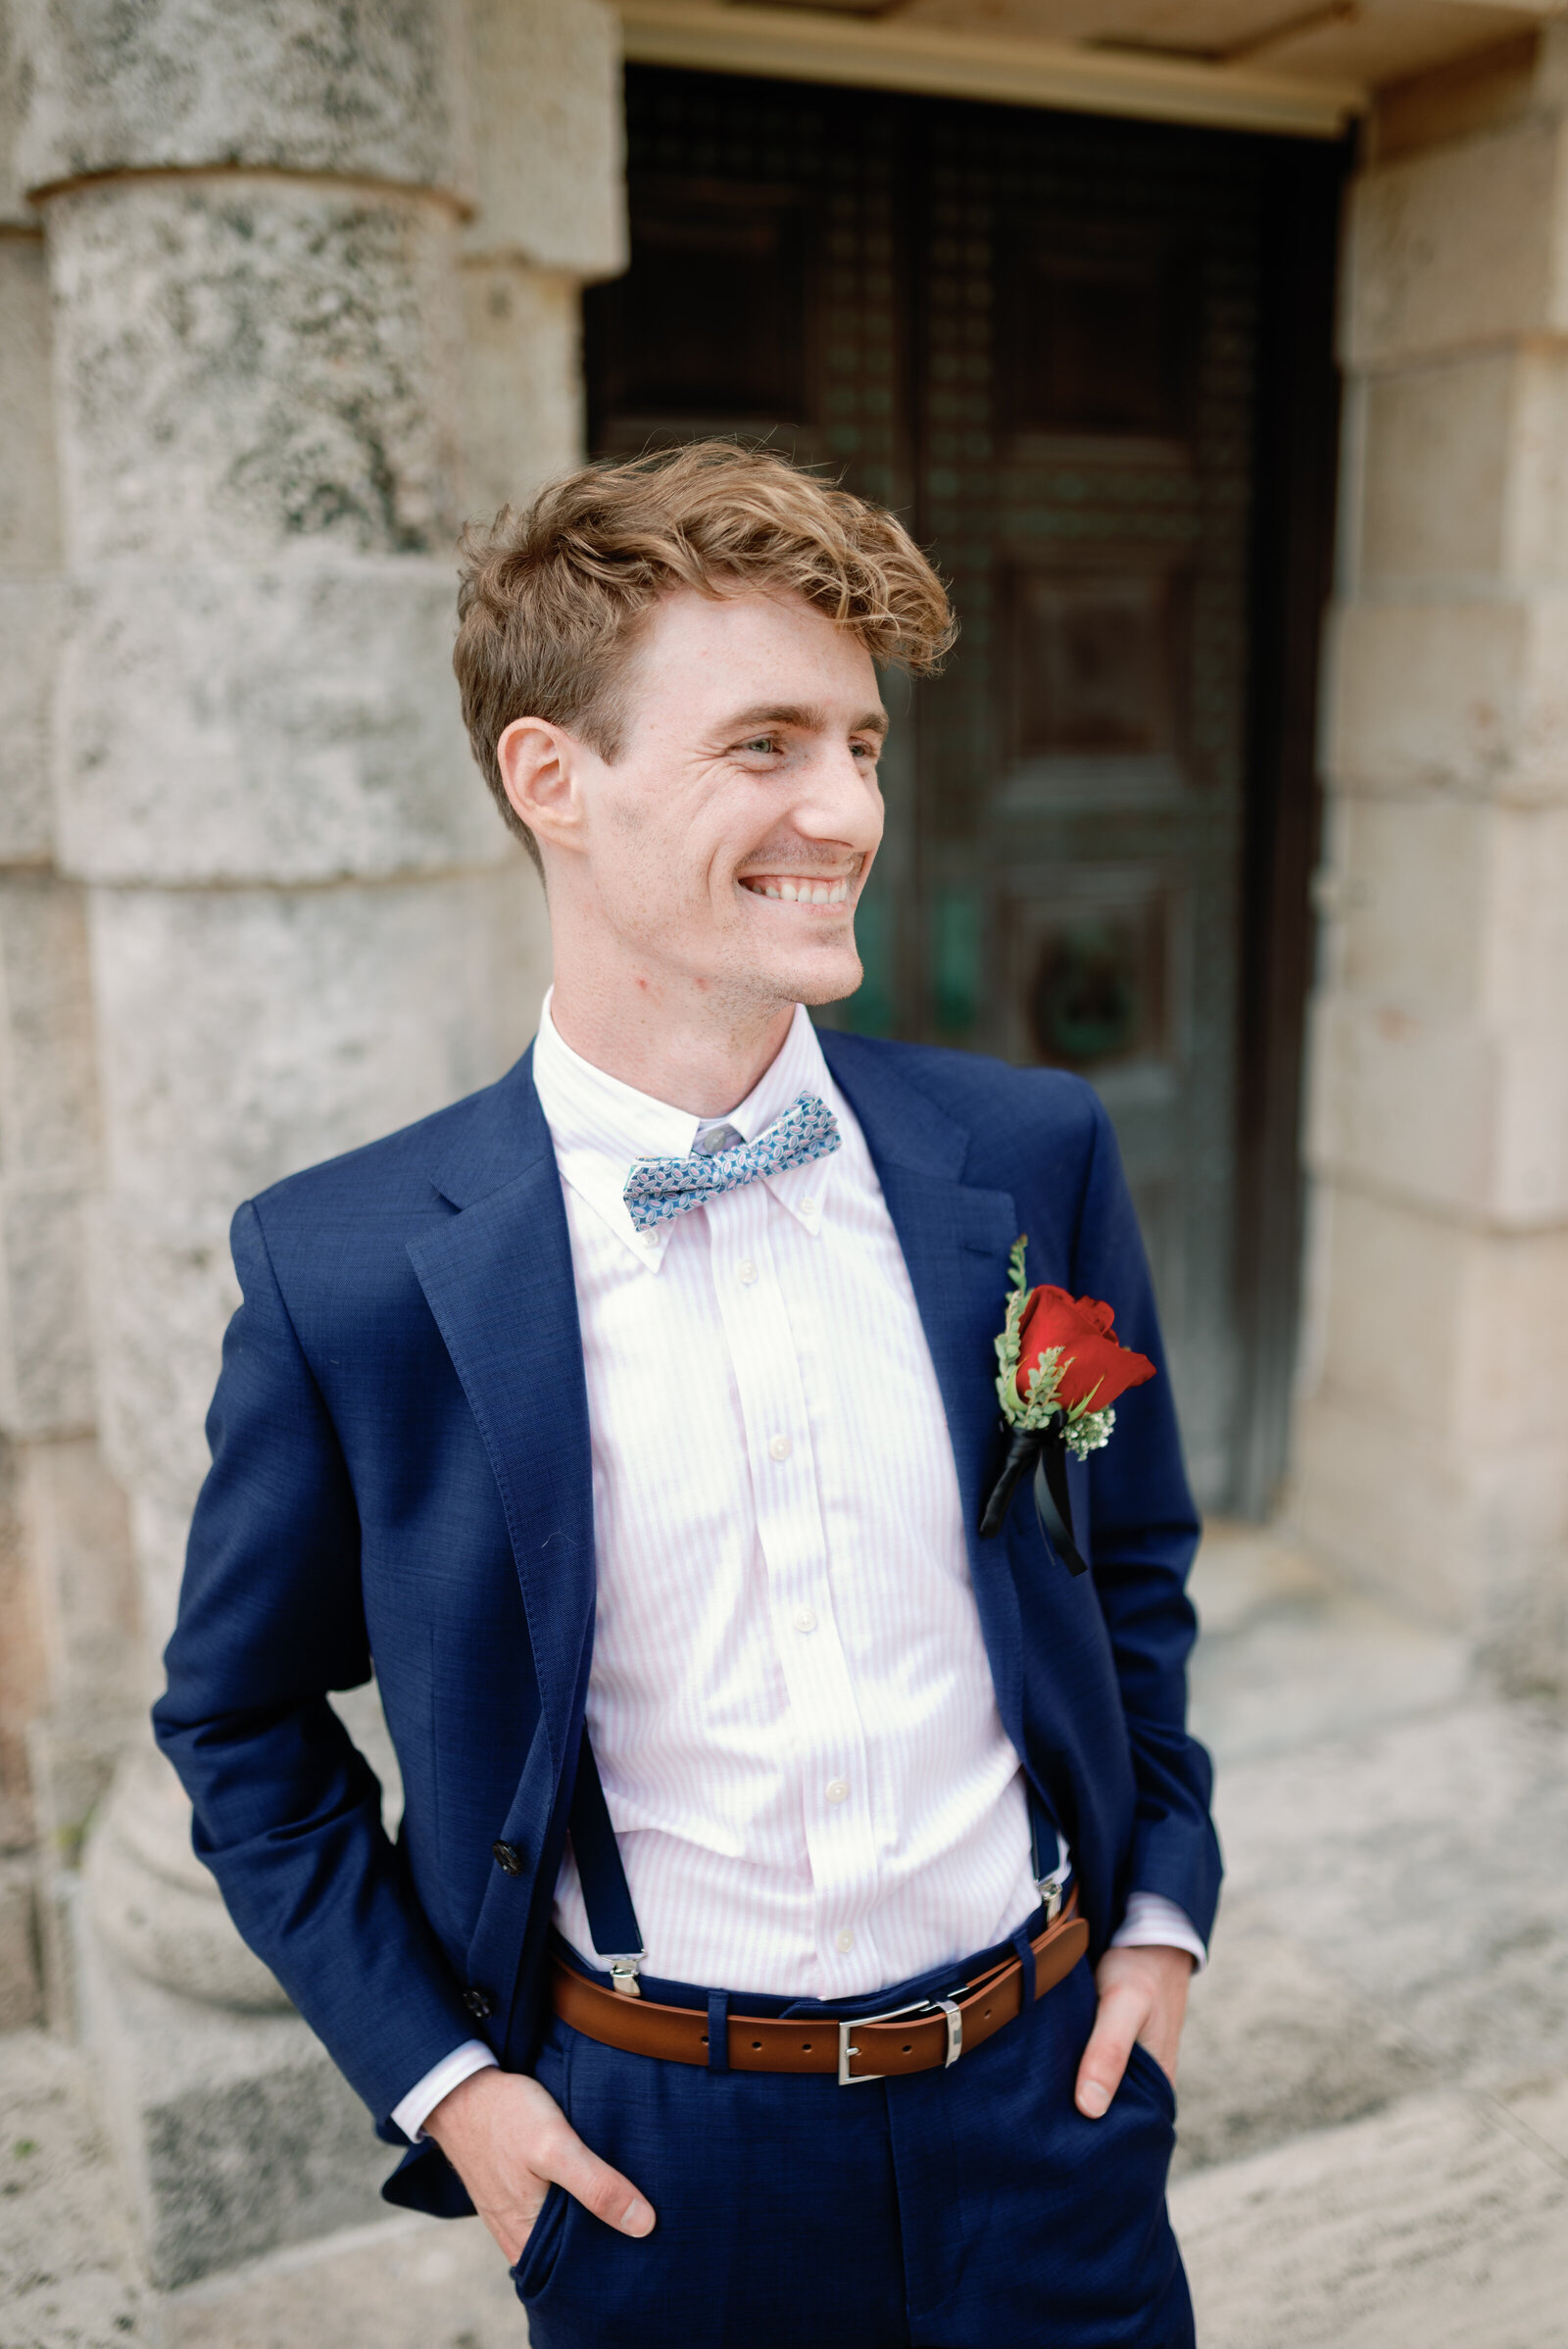 Groom standing alone, smiling with his hand in his pockets